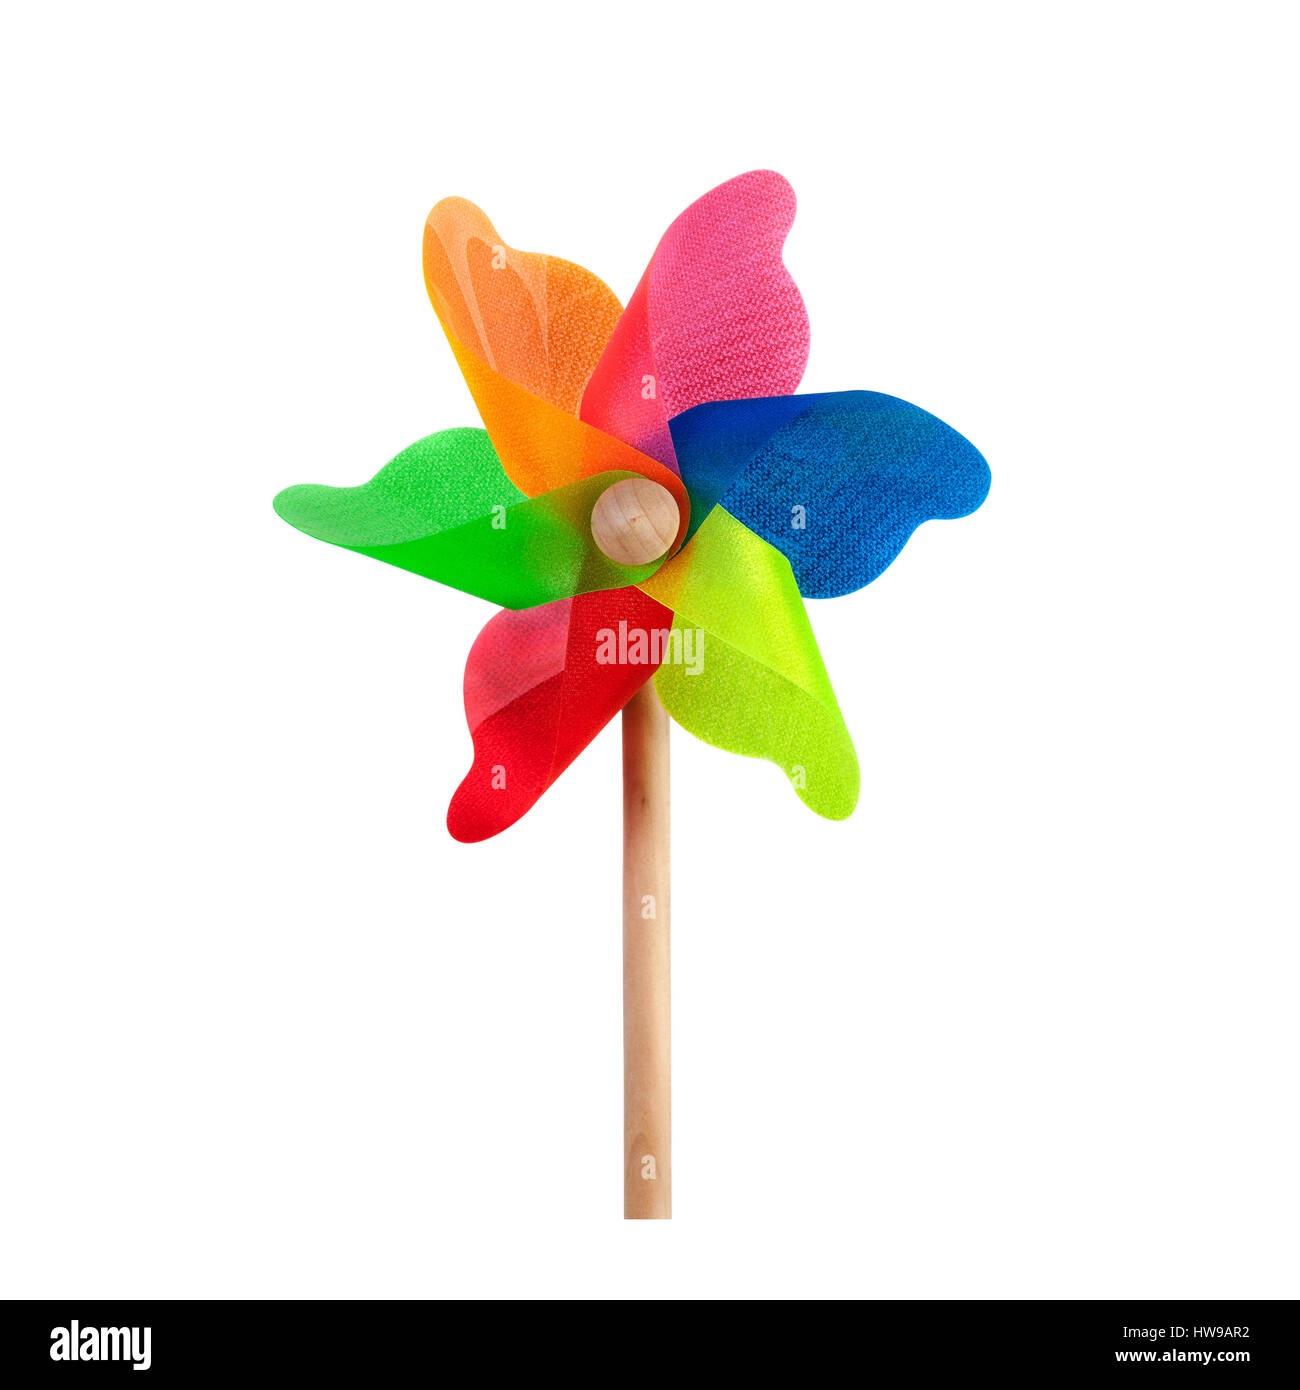 Pinwheel toy windmill multicolor garden wind spinner on white. Image included clipping path Stock Photo